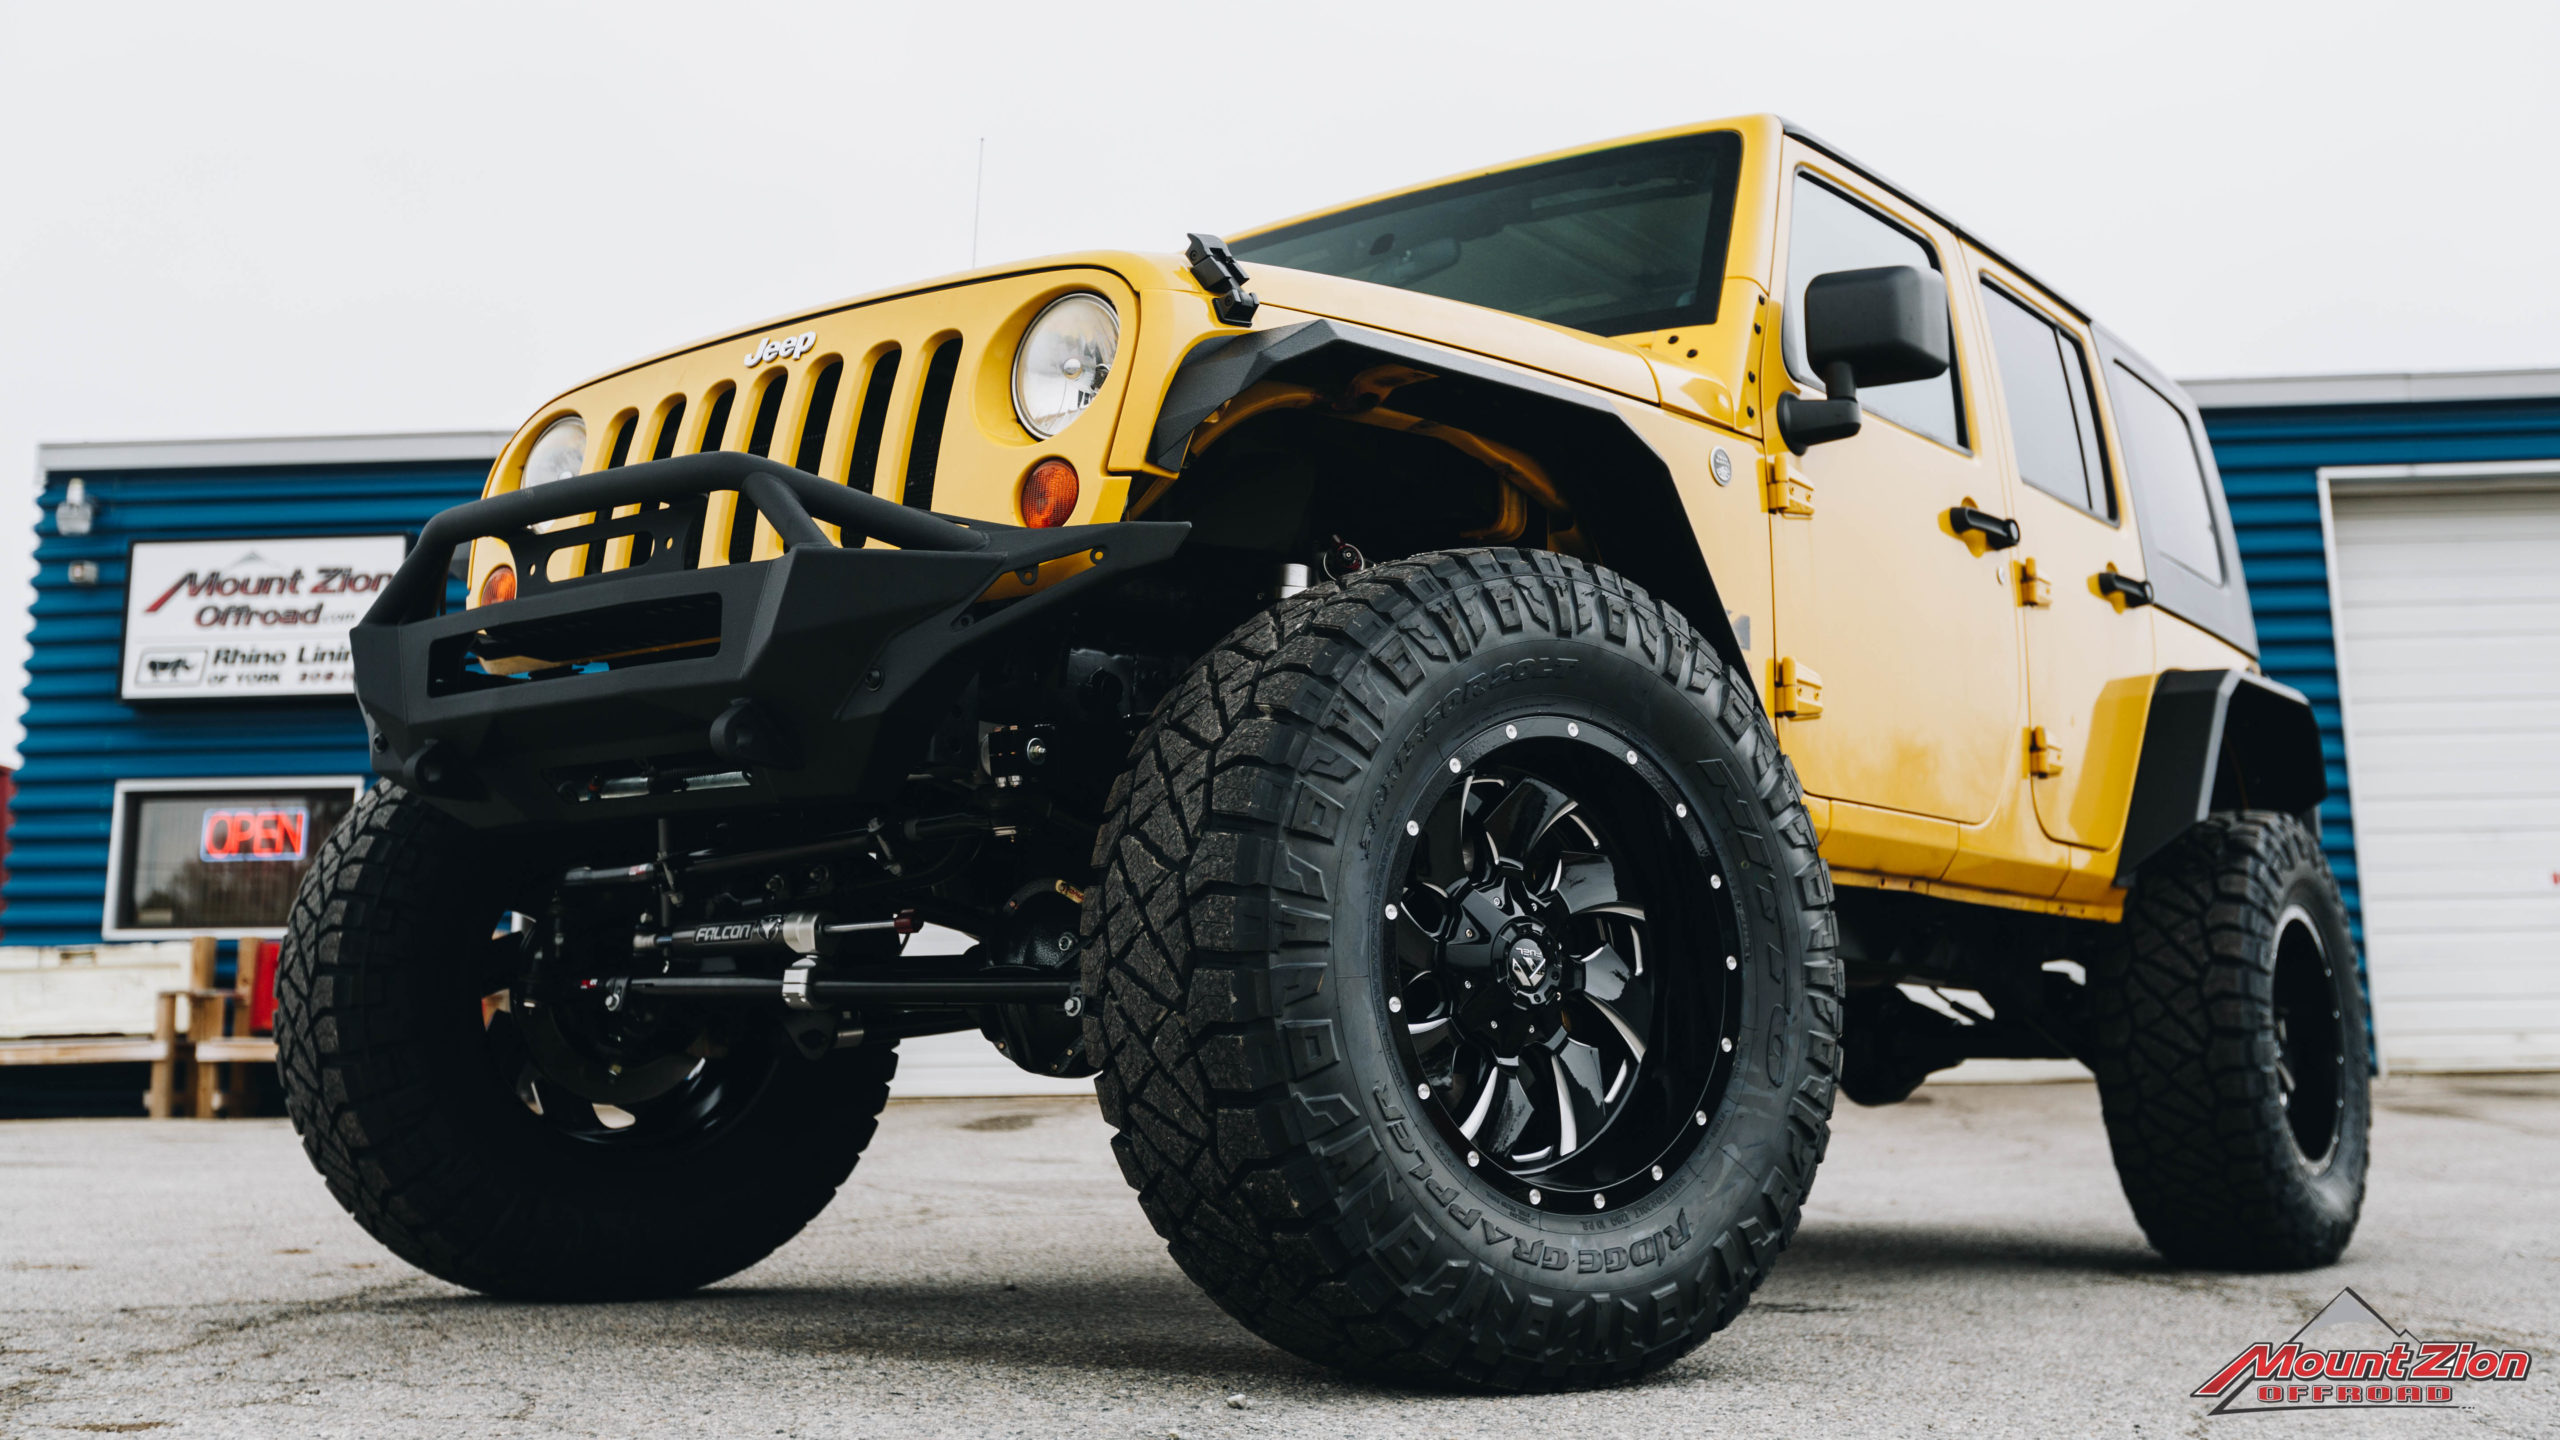 2008 Jeep Wrangler Unlimited X - Mount Zion Offroad